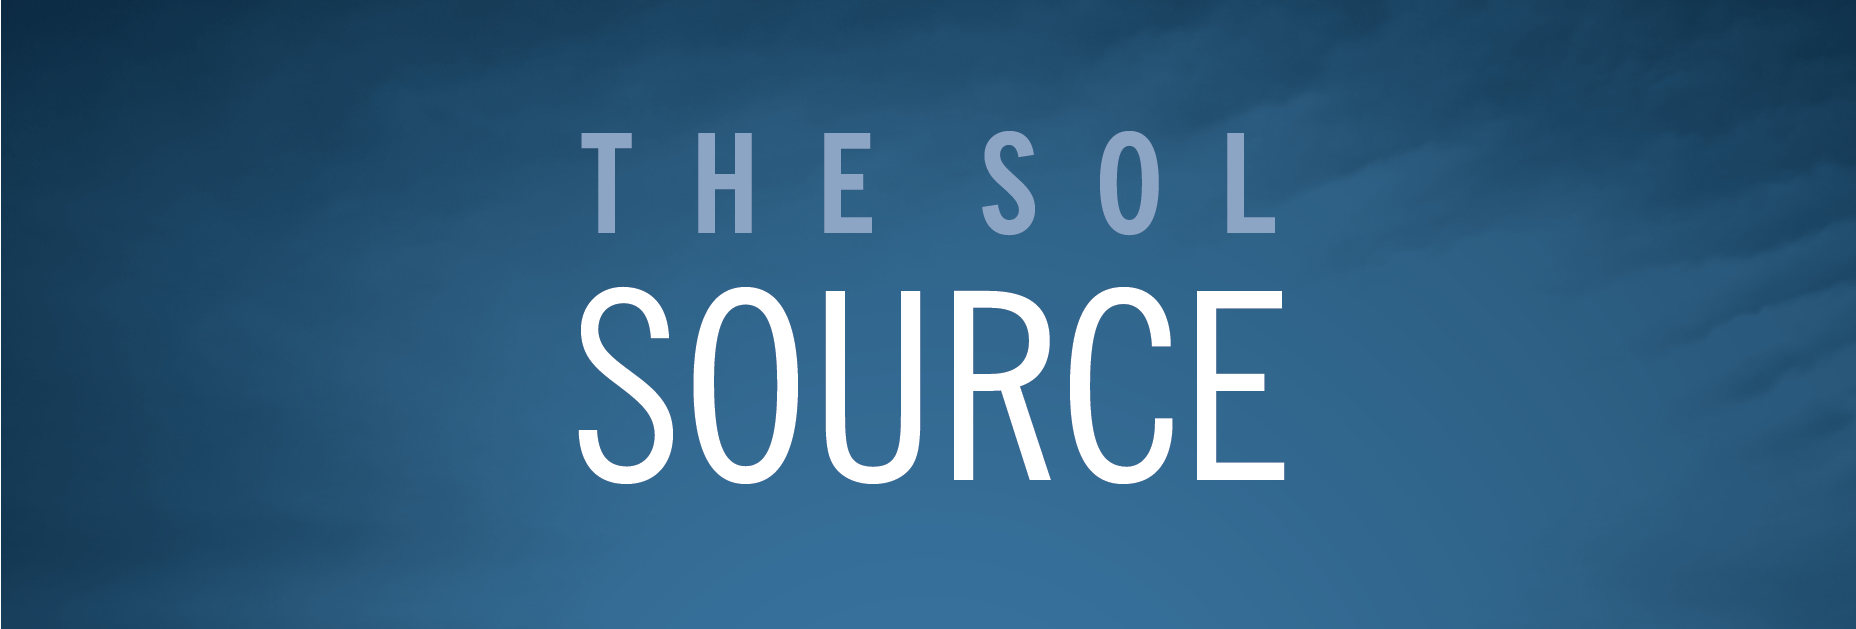 The Sol SOURCE, March 2017